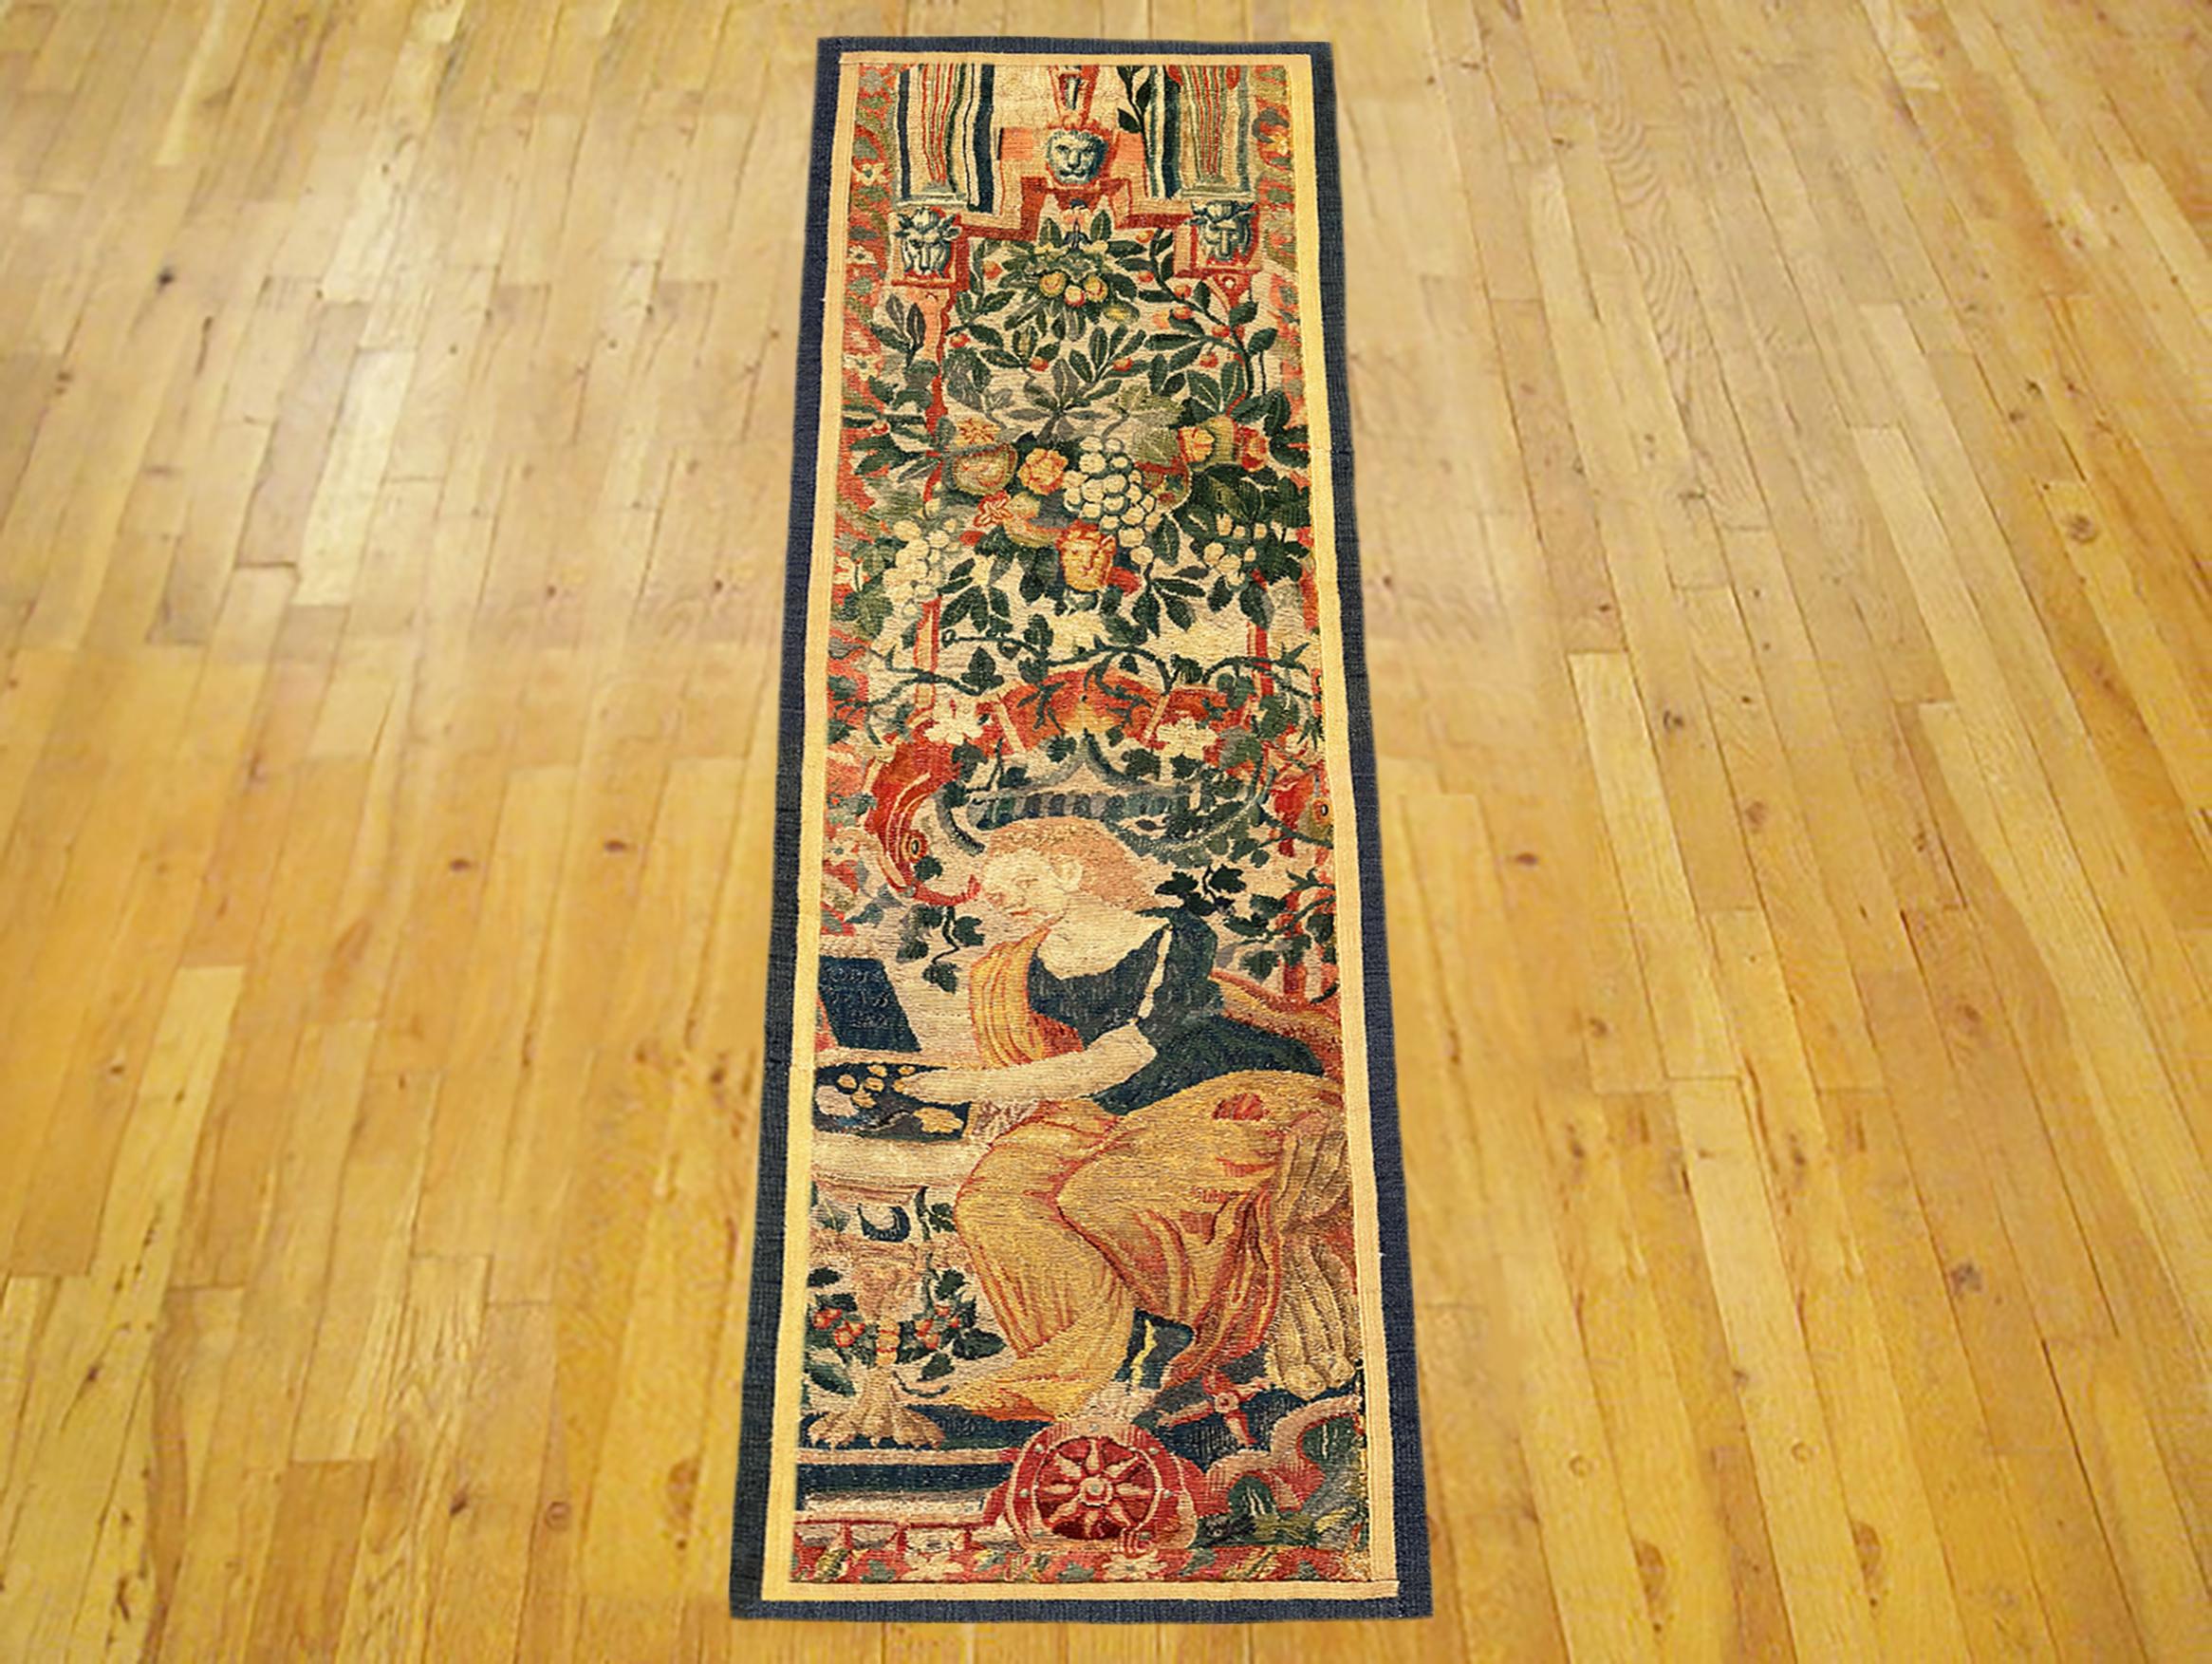 A late 16th Century Flemish Historical Tapestry panel. This vertically oriented decorative tapestry panel depicts a female figure at bottom, sitting within an elaborate floral reserve, with flowers and a portion of an arch at top. The central area